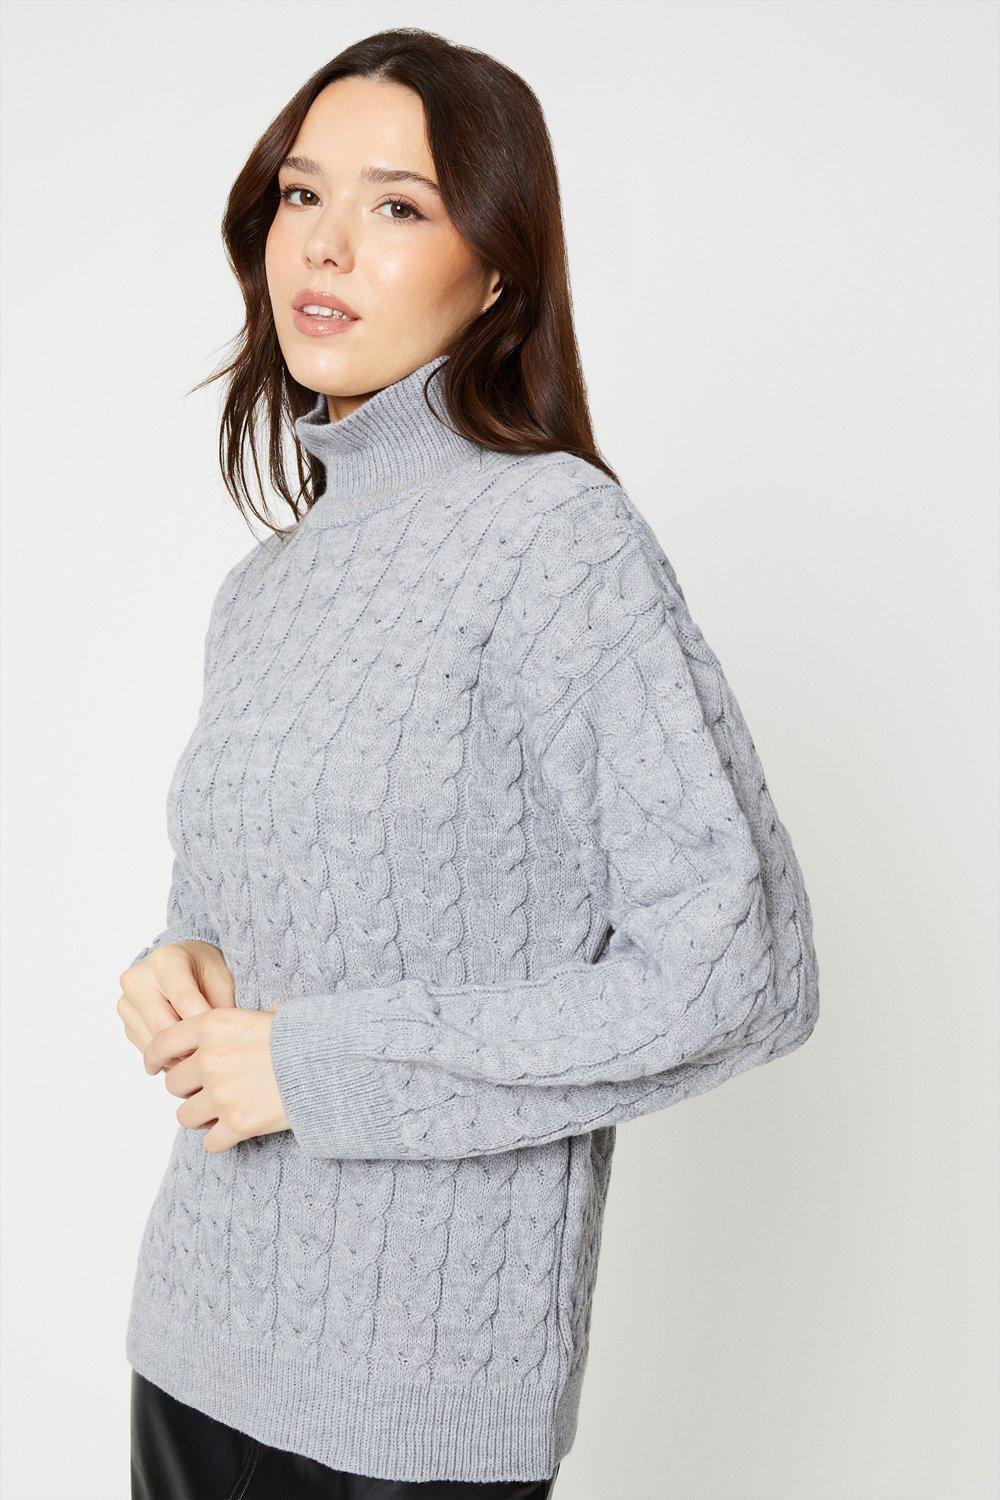 Women's High Neck Cable Jumper - grey marl - S